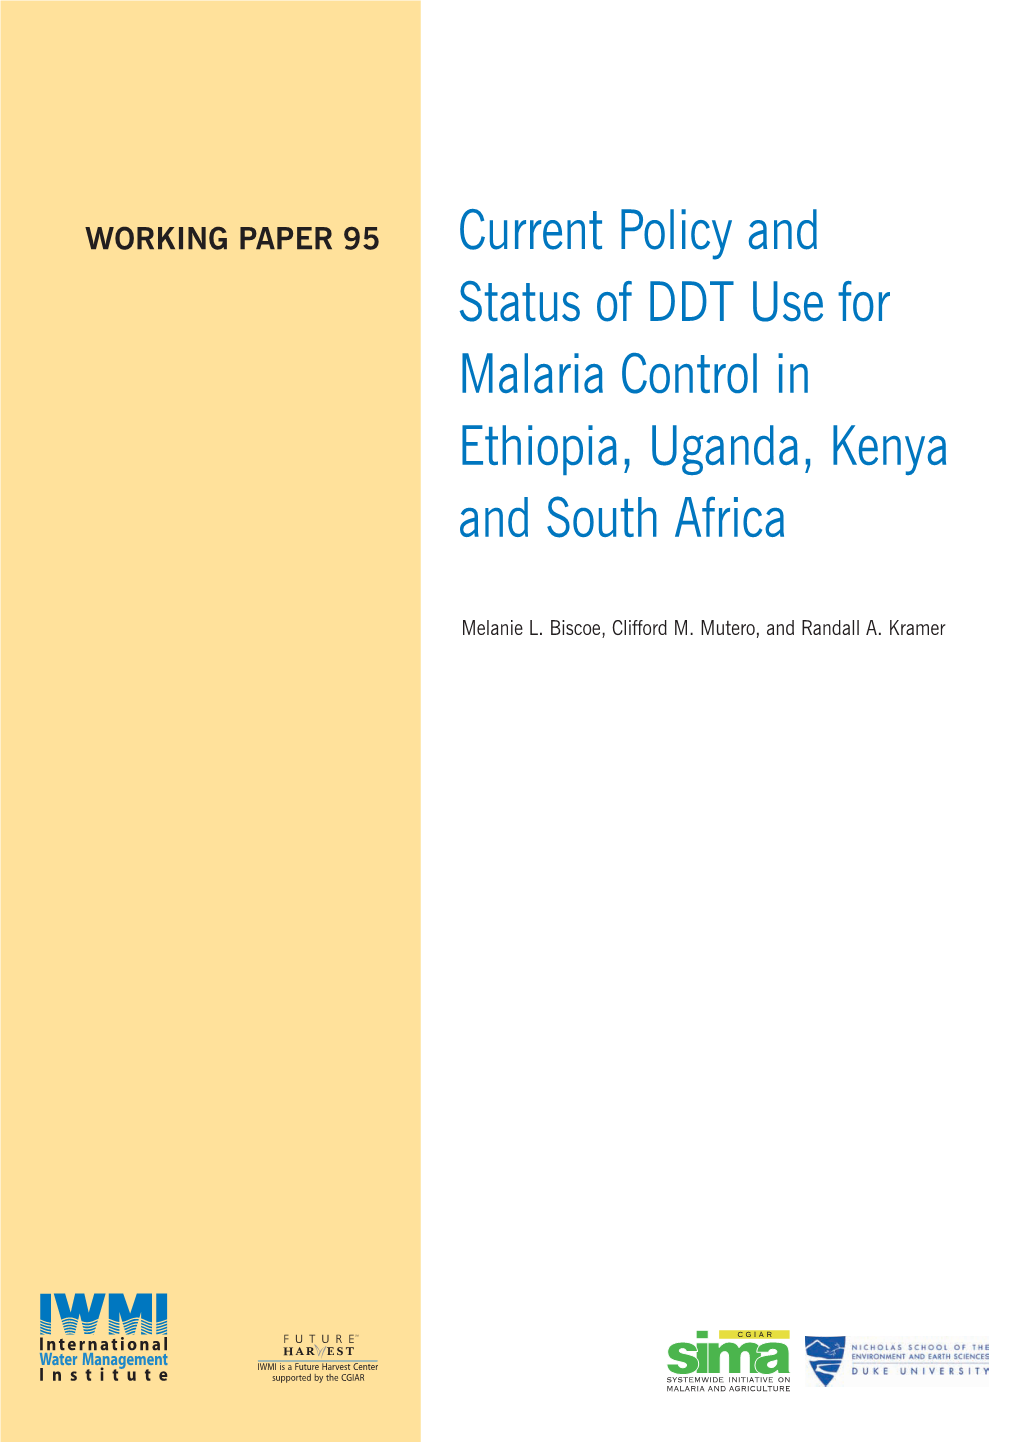 Current Policy and Status of DDT Use for Malaria Control in Ethiopia, Uganda, Kenya and South Africa